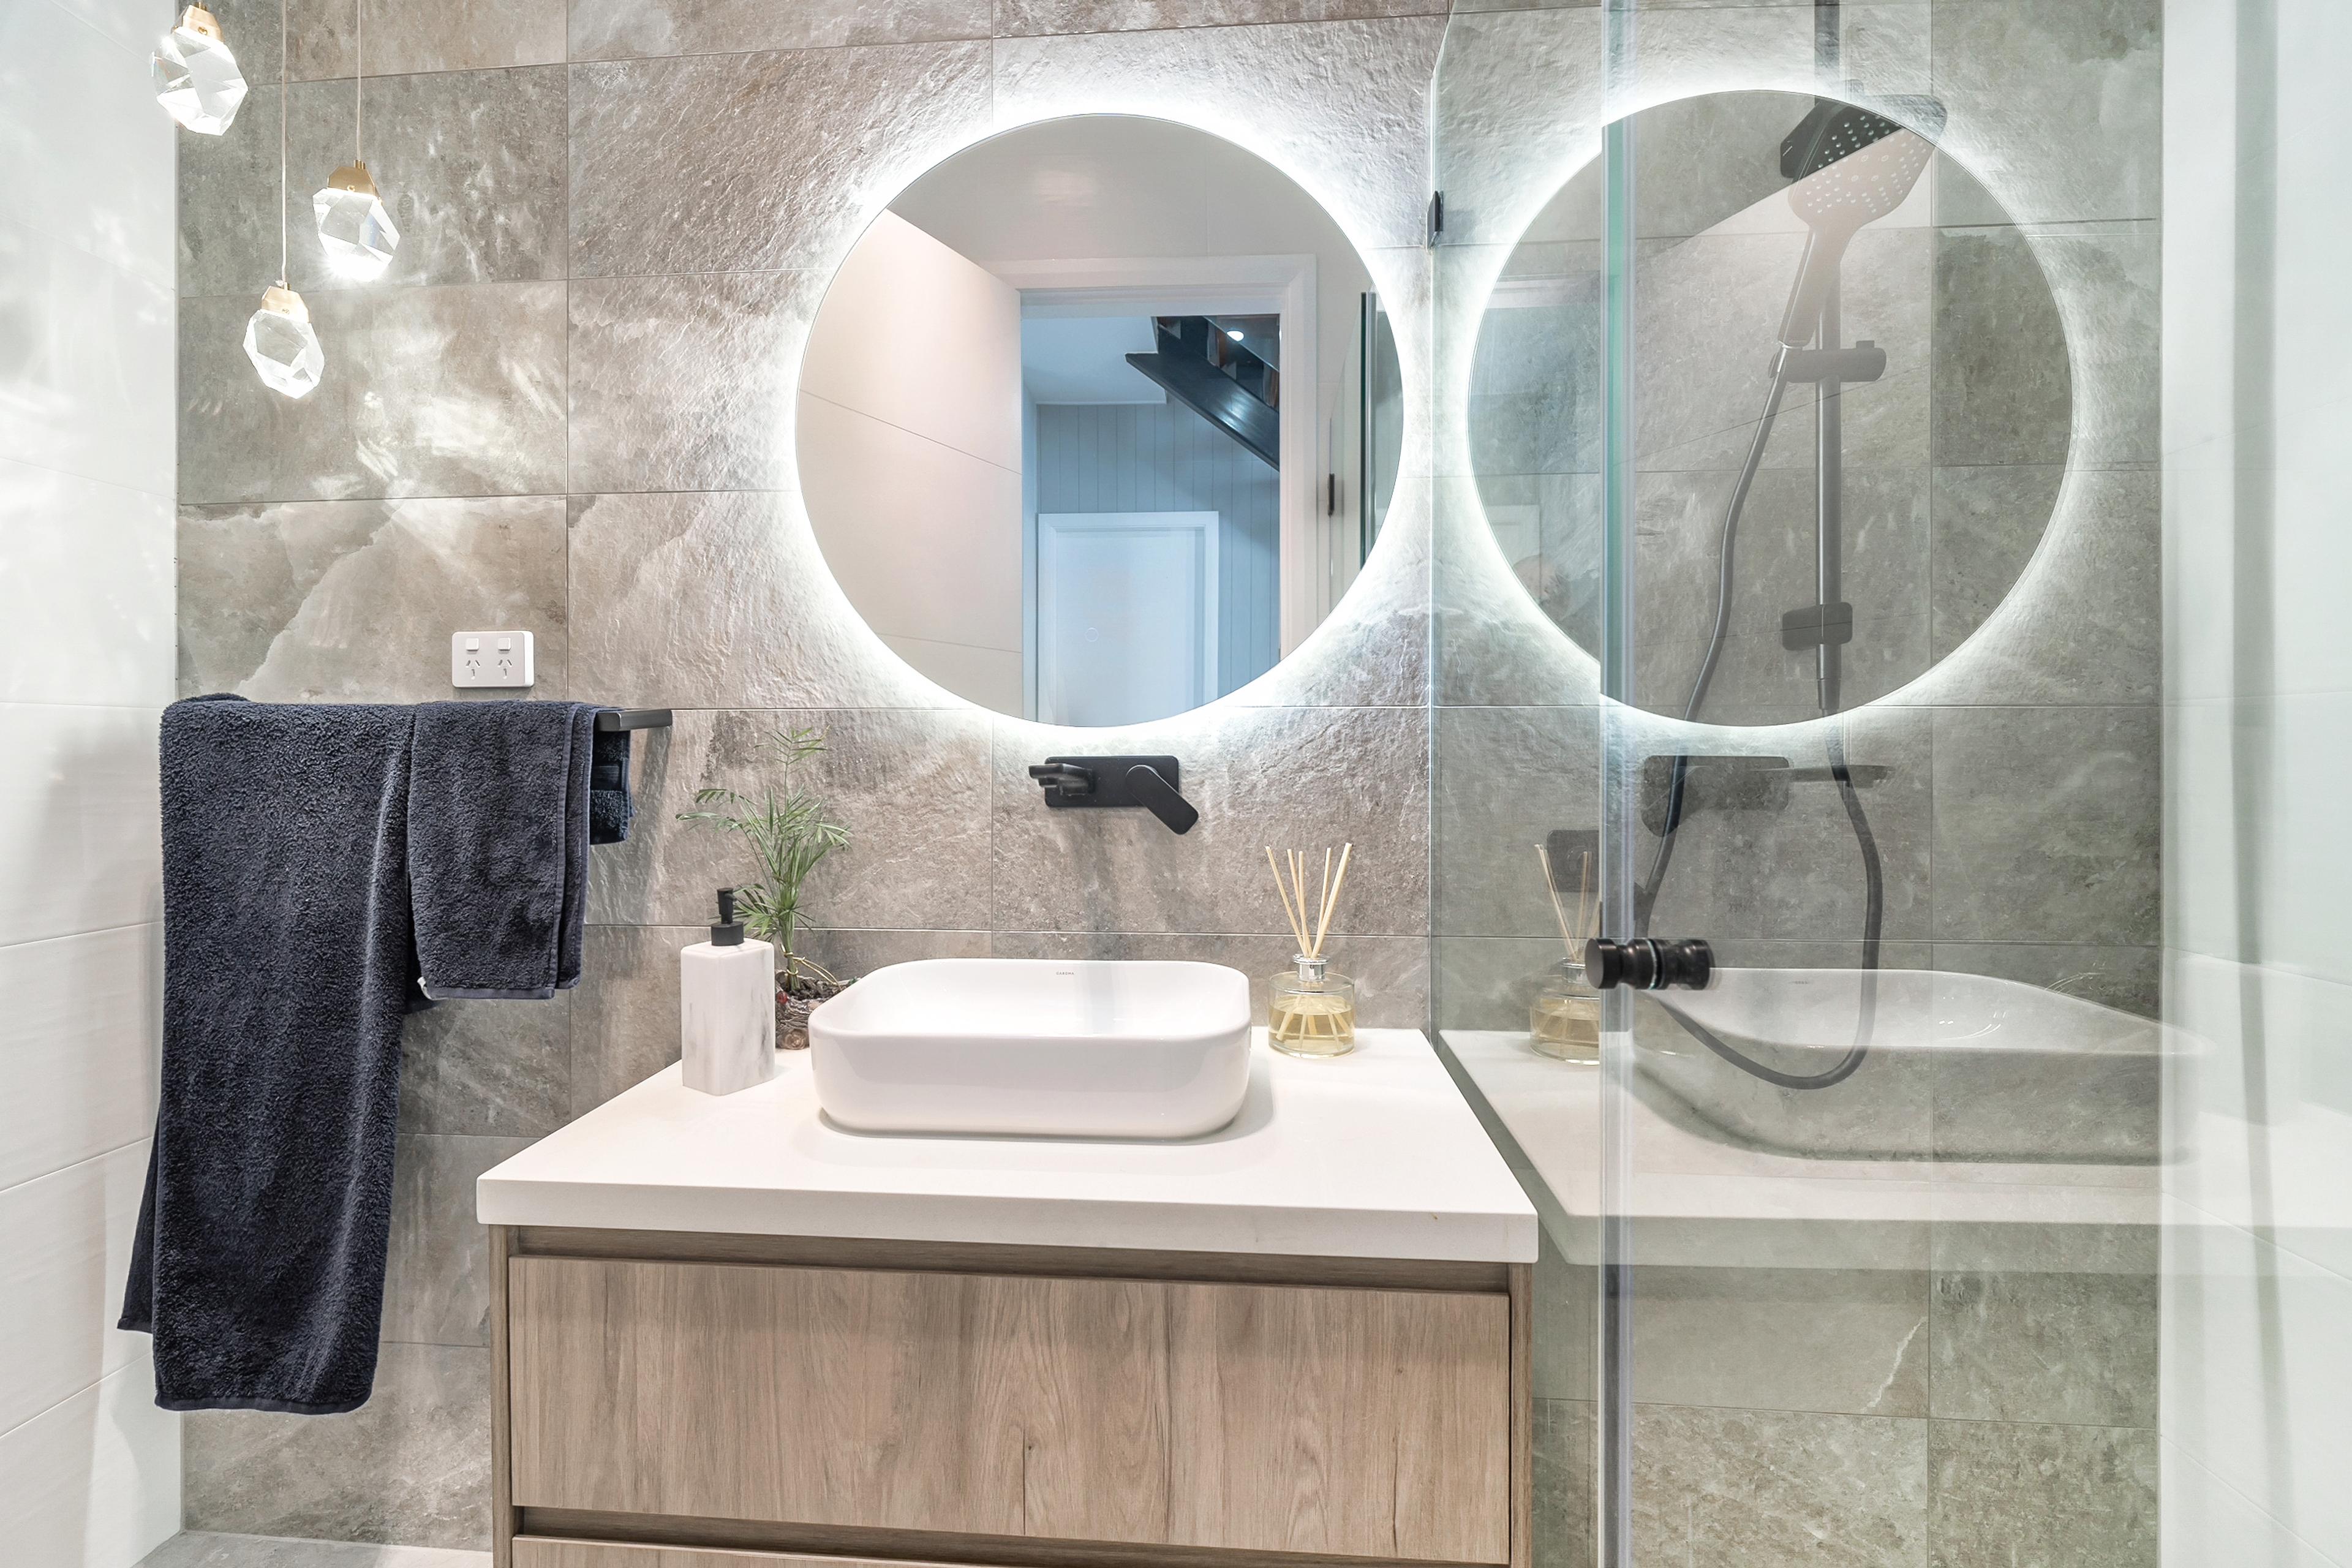 Dezire Homes build, sophisticated vanity with designer accents and a feature wall